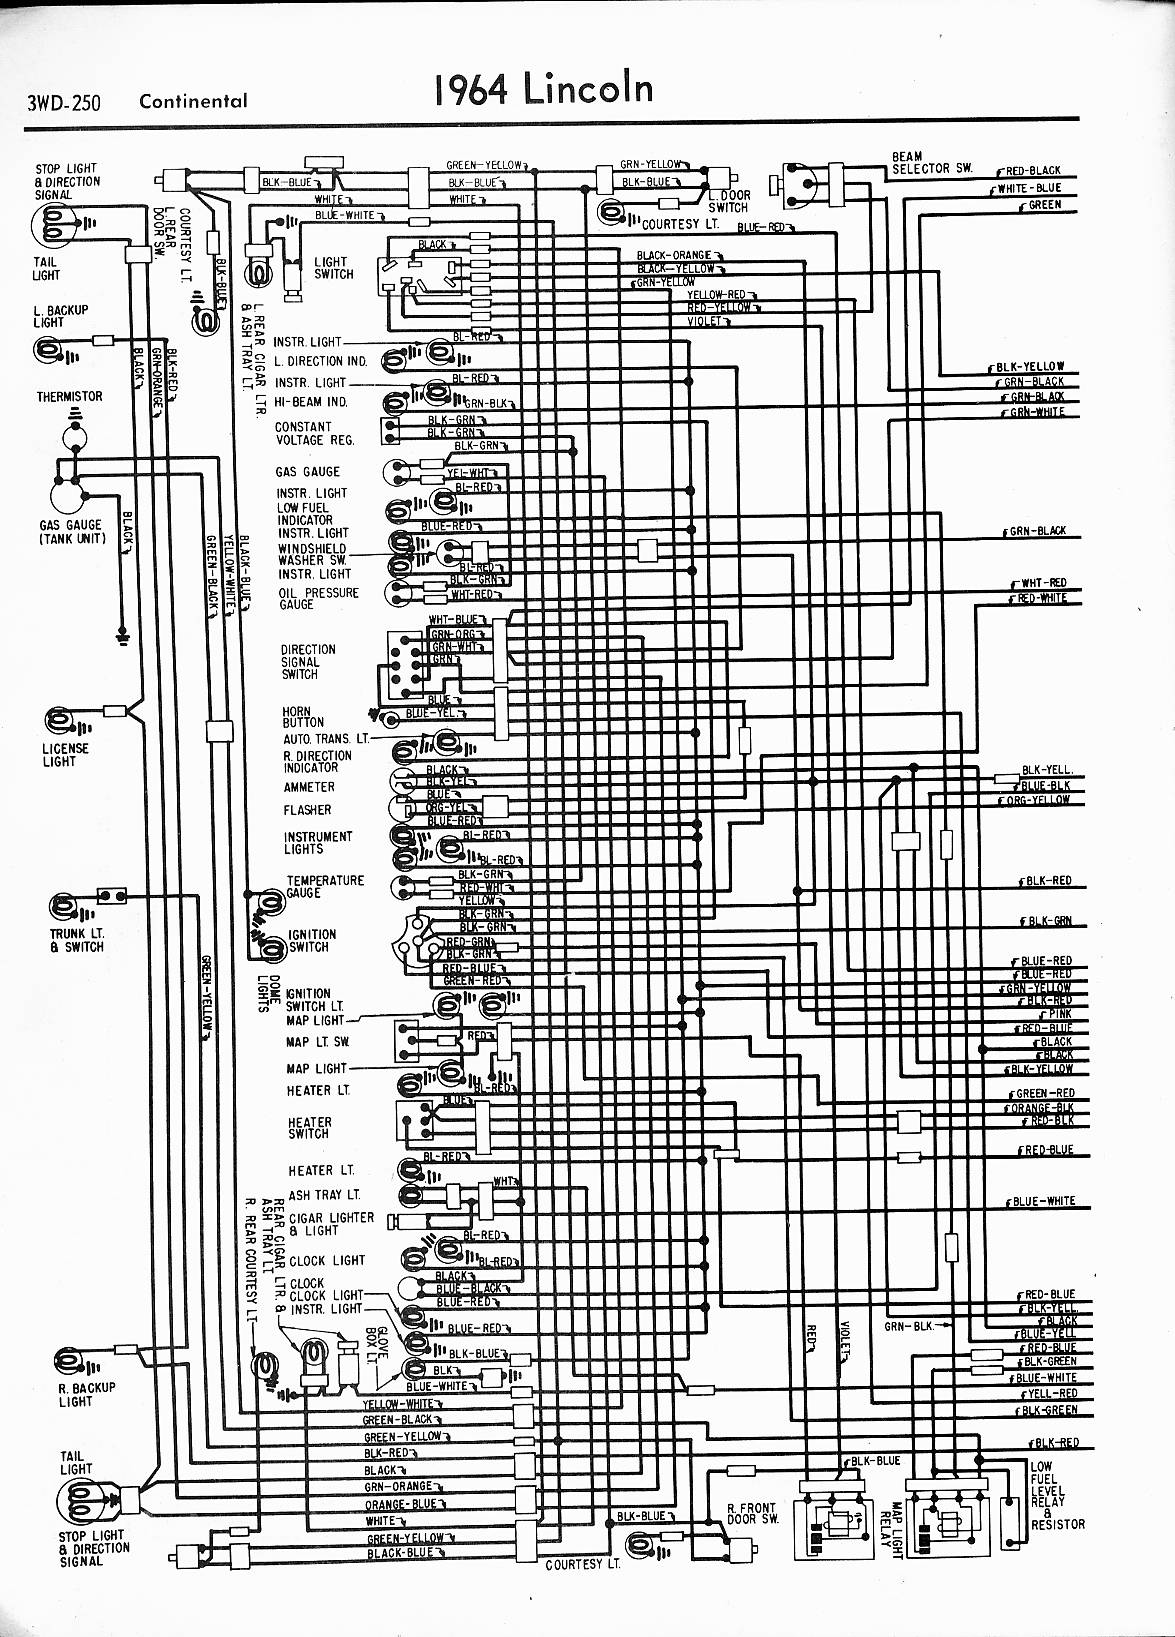 Lincoln Wiring Diagrams: 1957 - 1965